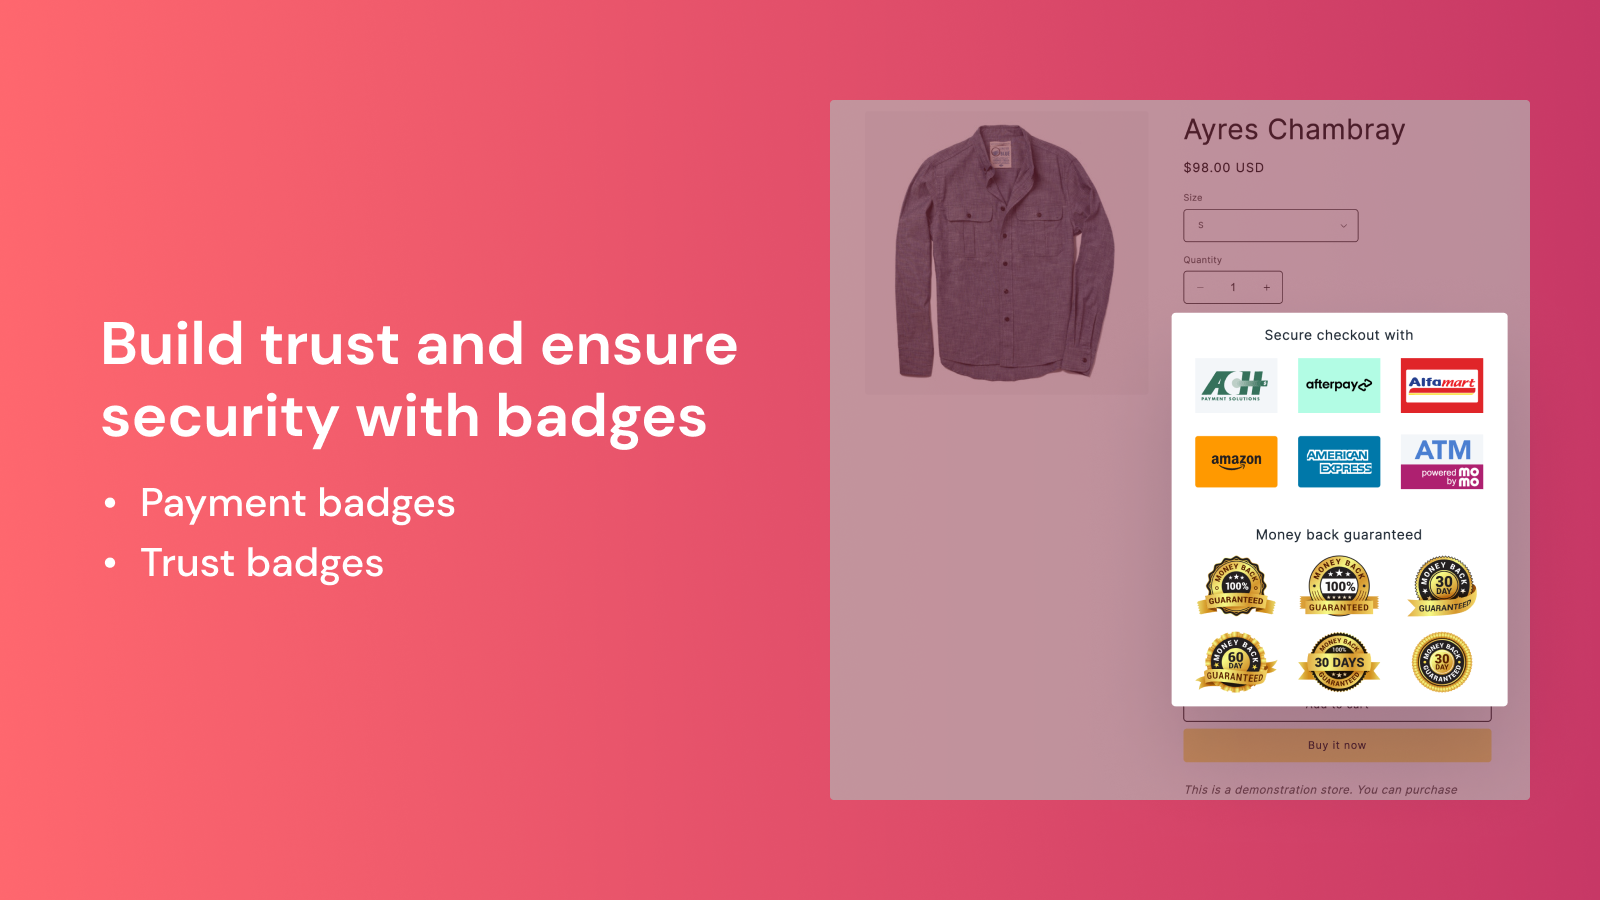 Build trust and ensure security with badges